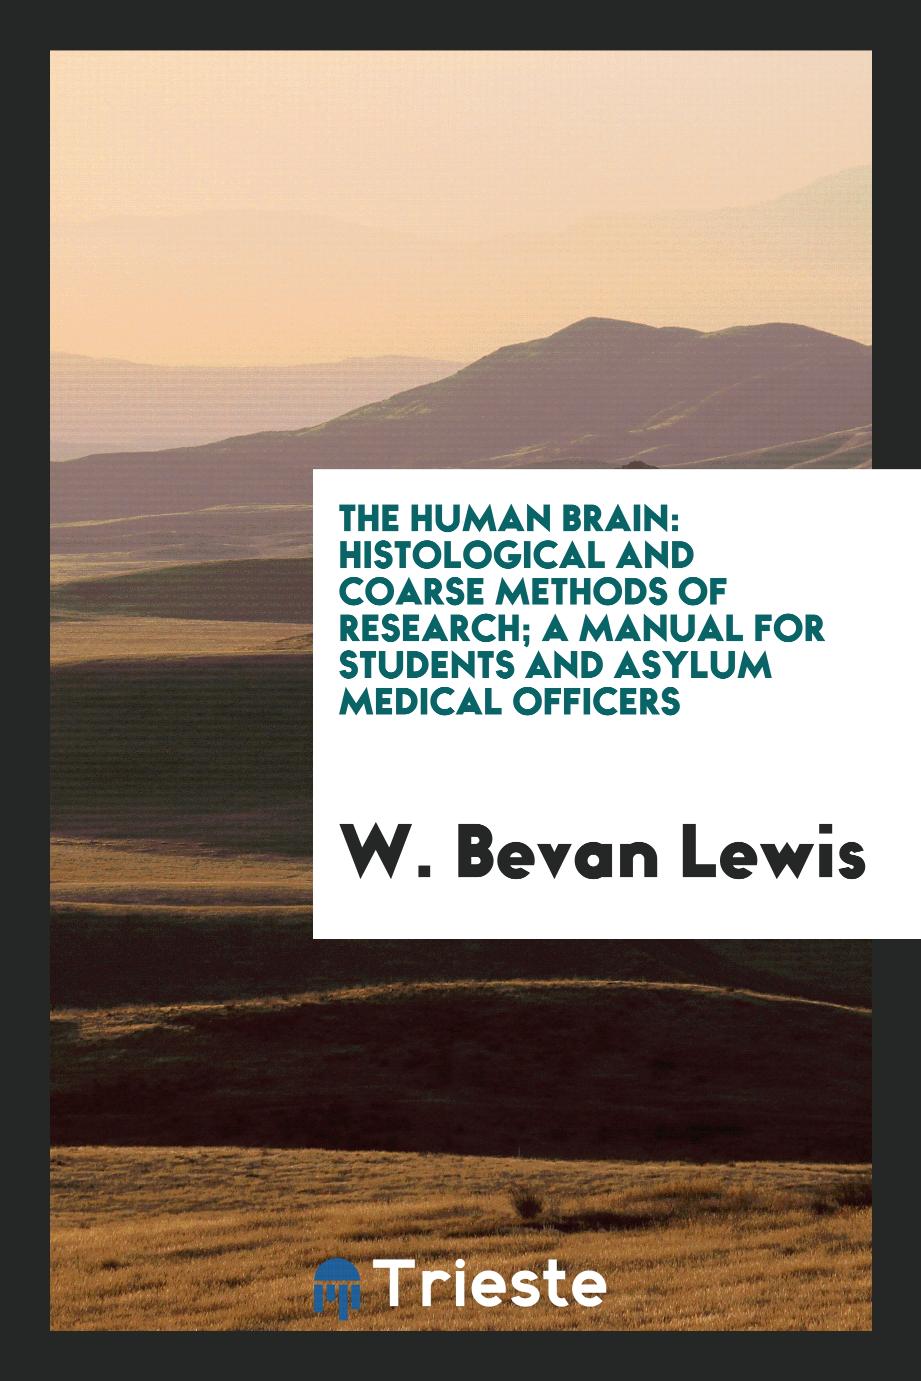 The human brain: histological and coarse methods of research; a manual for students and asylum medical officers